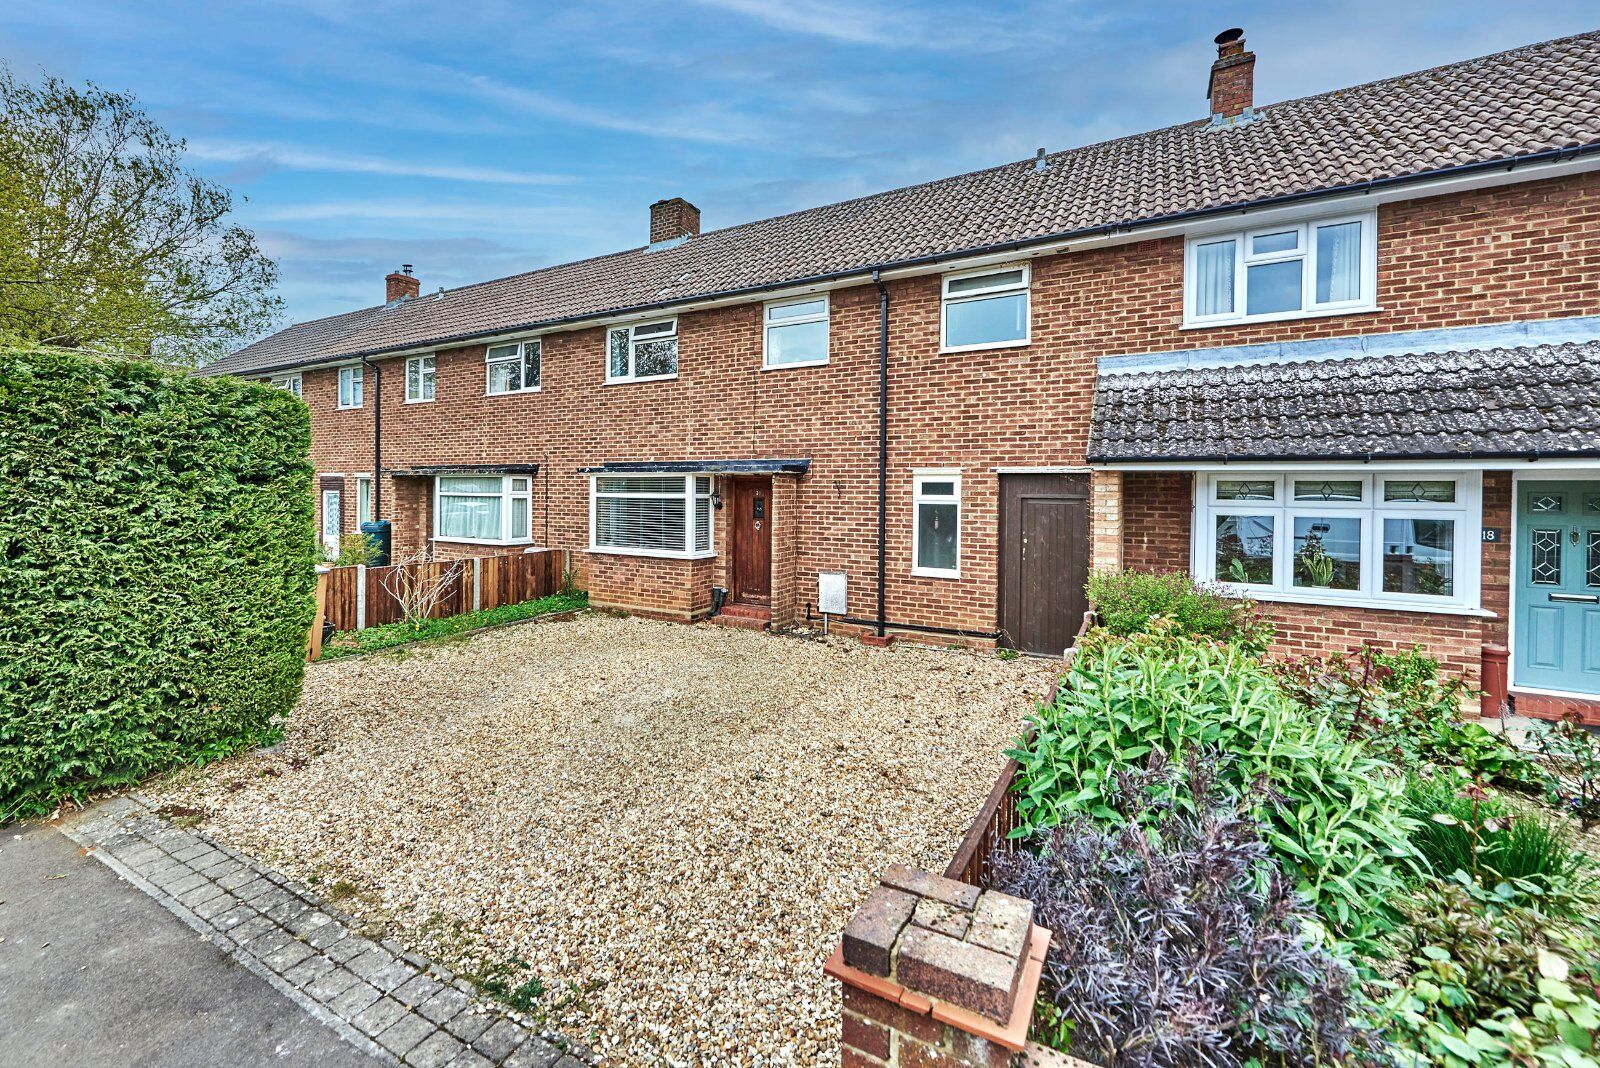 3 bedroom mid terraced house for sale Mill Way, Breachwood Green, SG4, main image